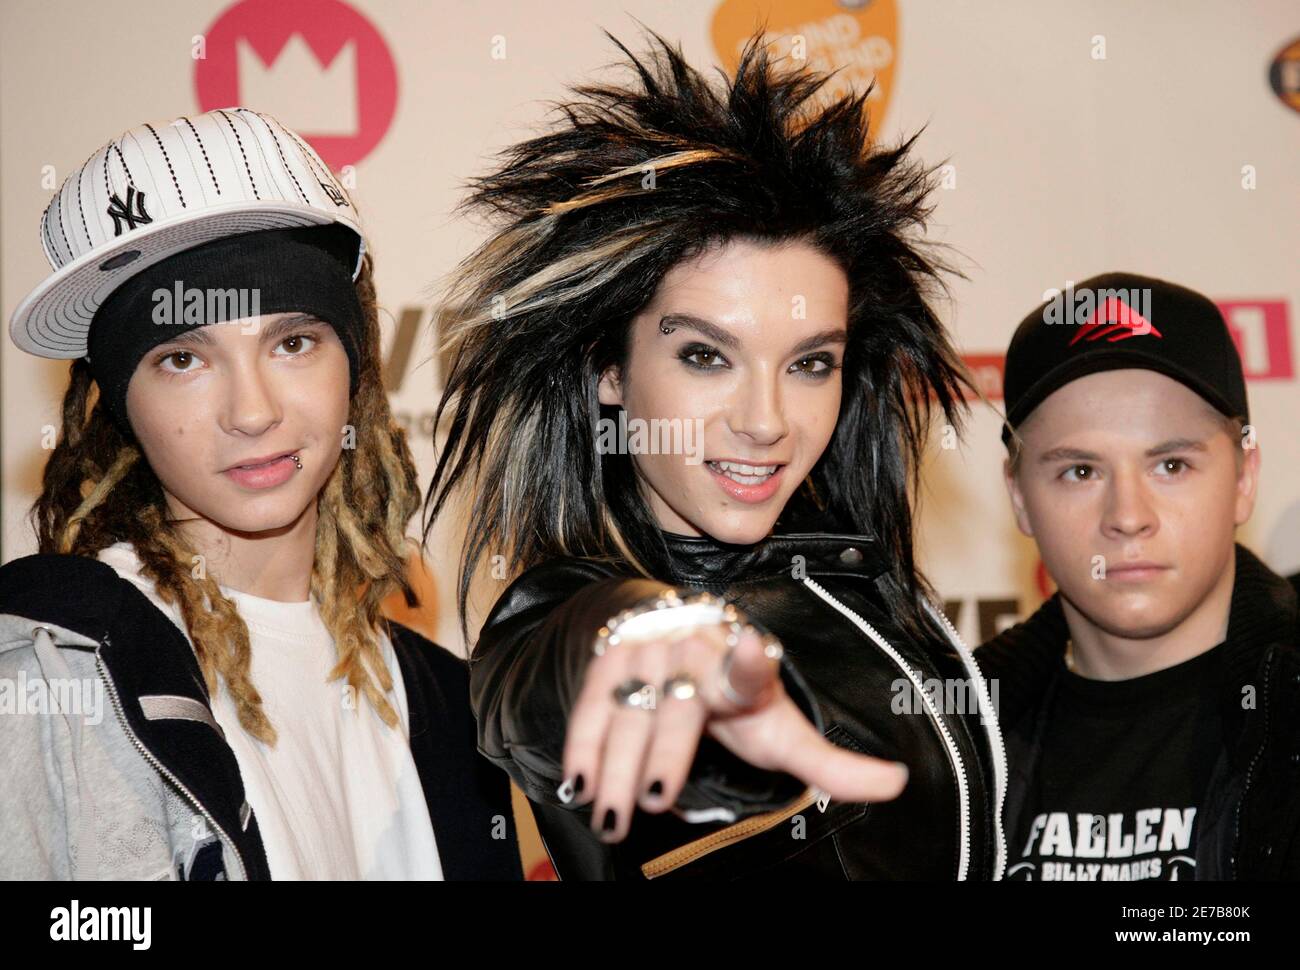 geni Tilbageholdelse Ved daggry German band Tokio Hotel (L-R) Tom Kaulitz ,lead singer Bill Kaulitz and  Gustav Schaefer arrive at the "Eins Live Krone 2006", Germany's biggest  radio award, December 7, 2006, in the town of